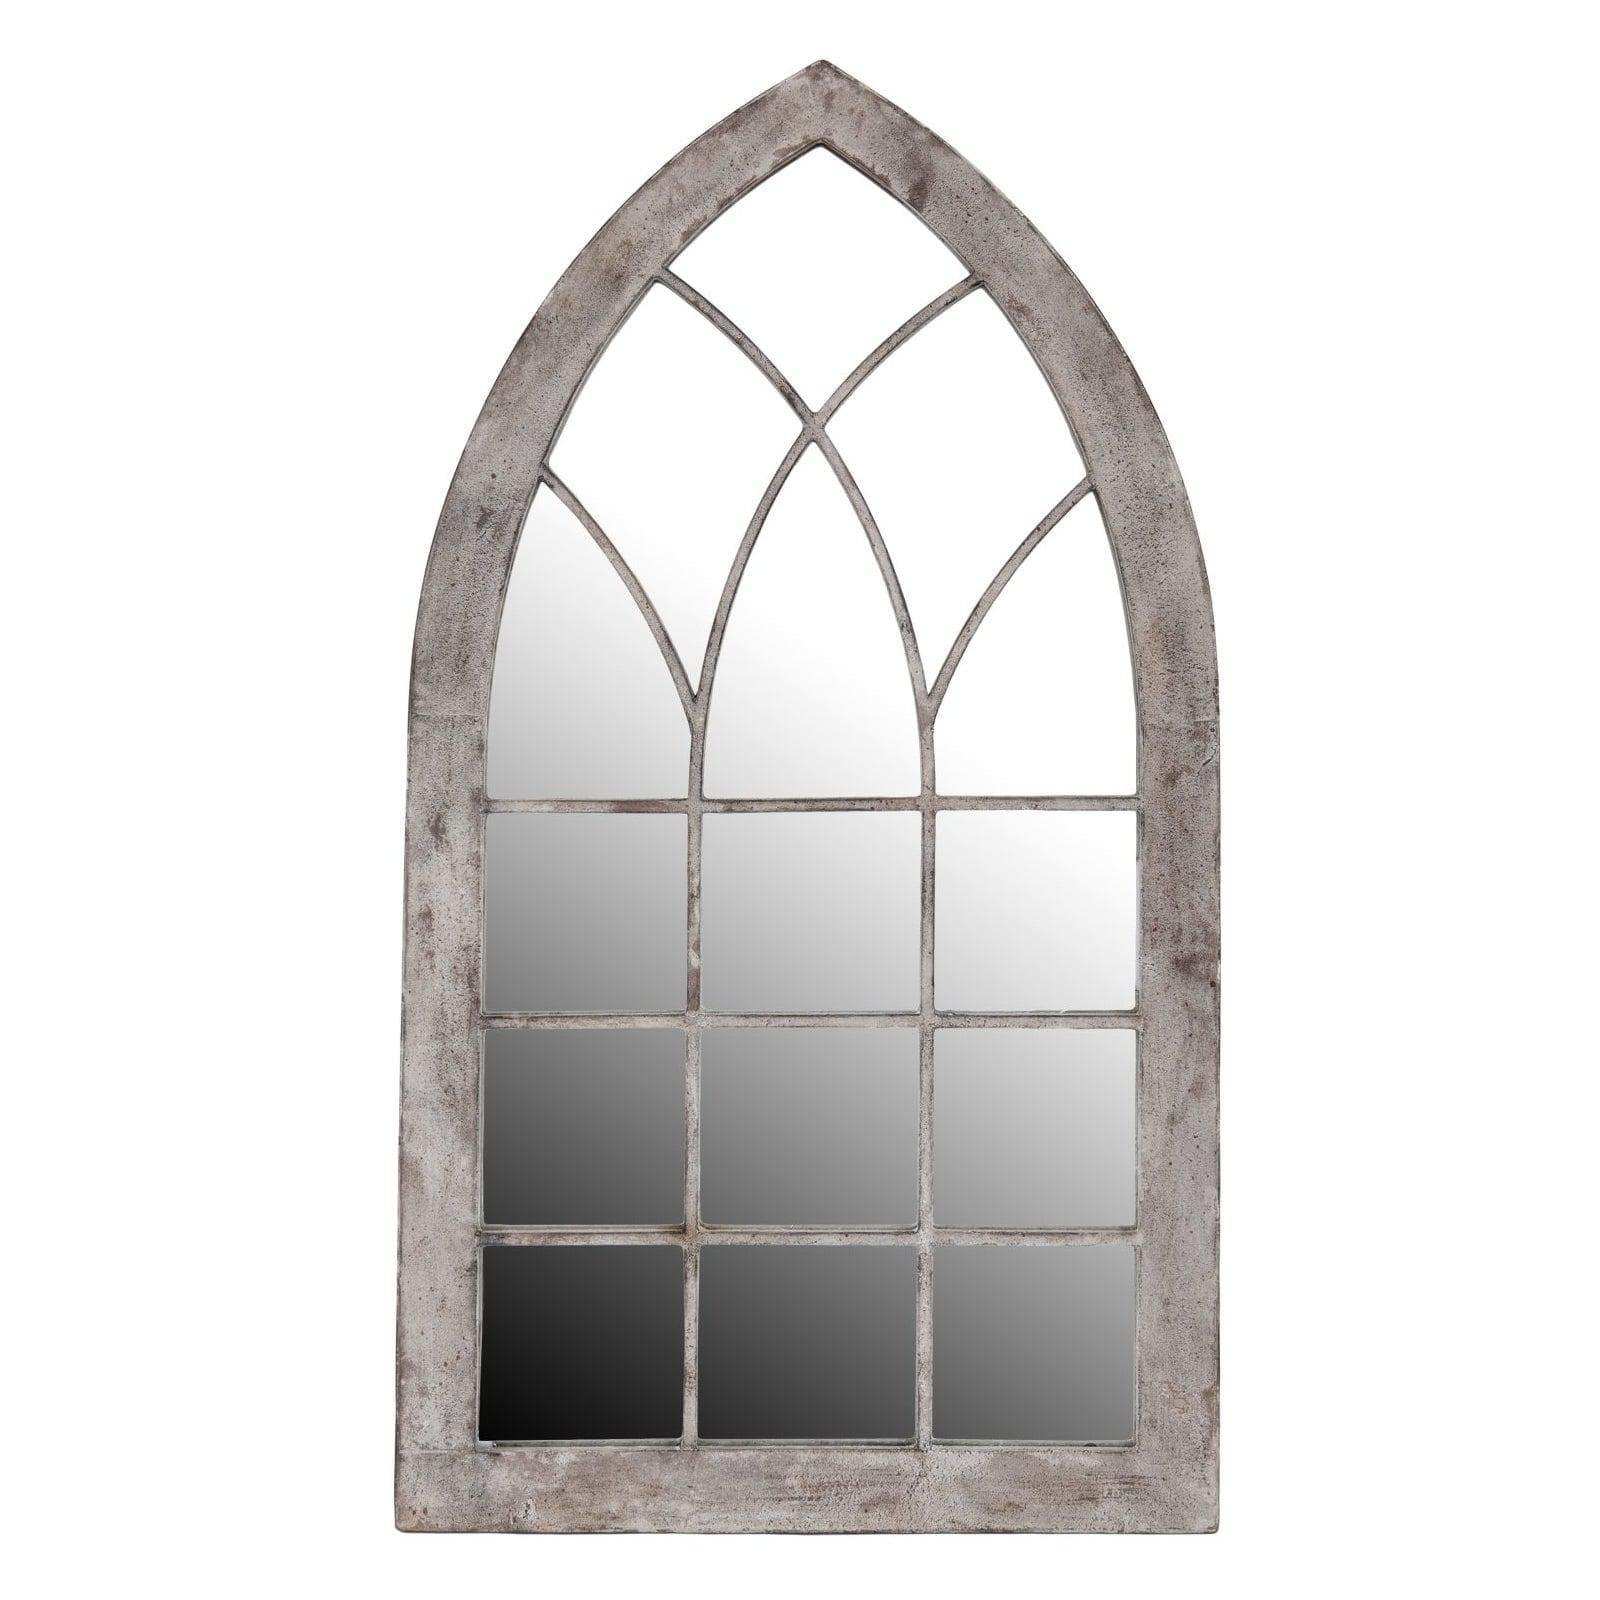 Rustic Arched Metal Garden Window Mirror - The Farthing